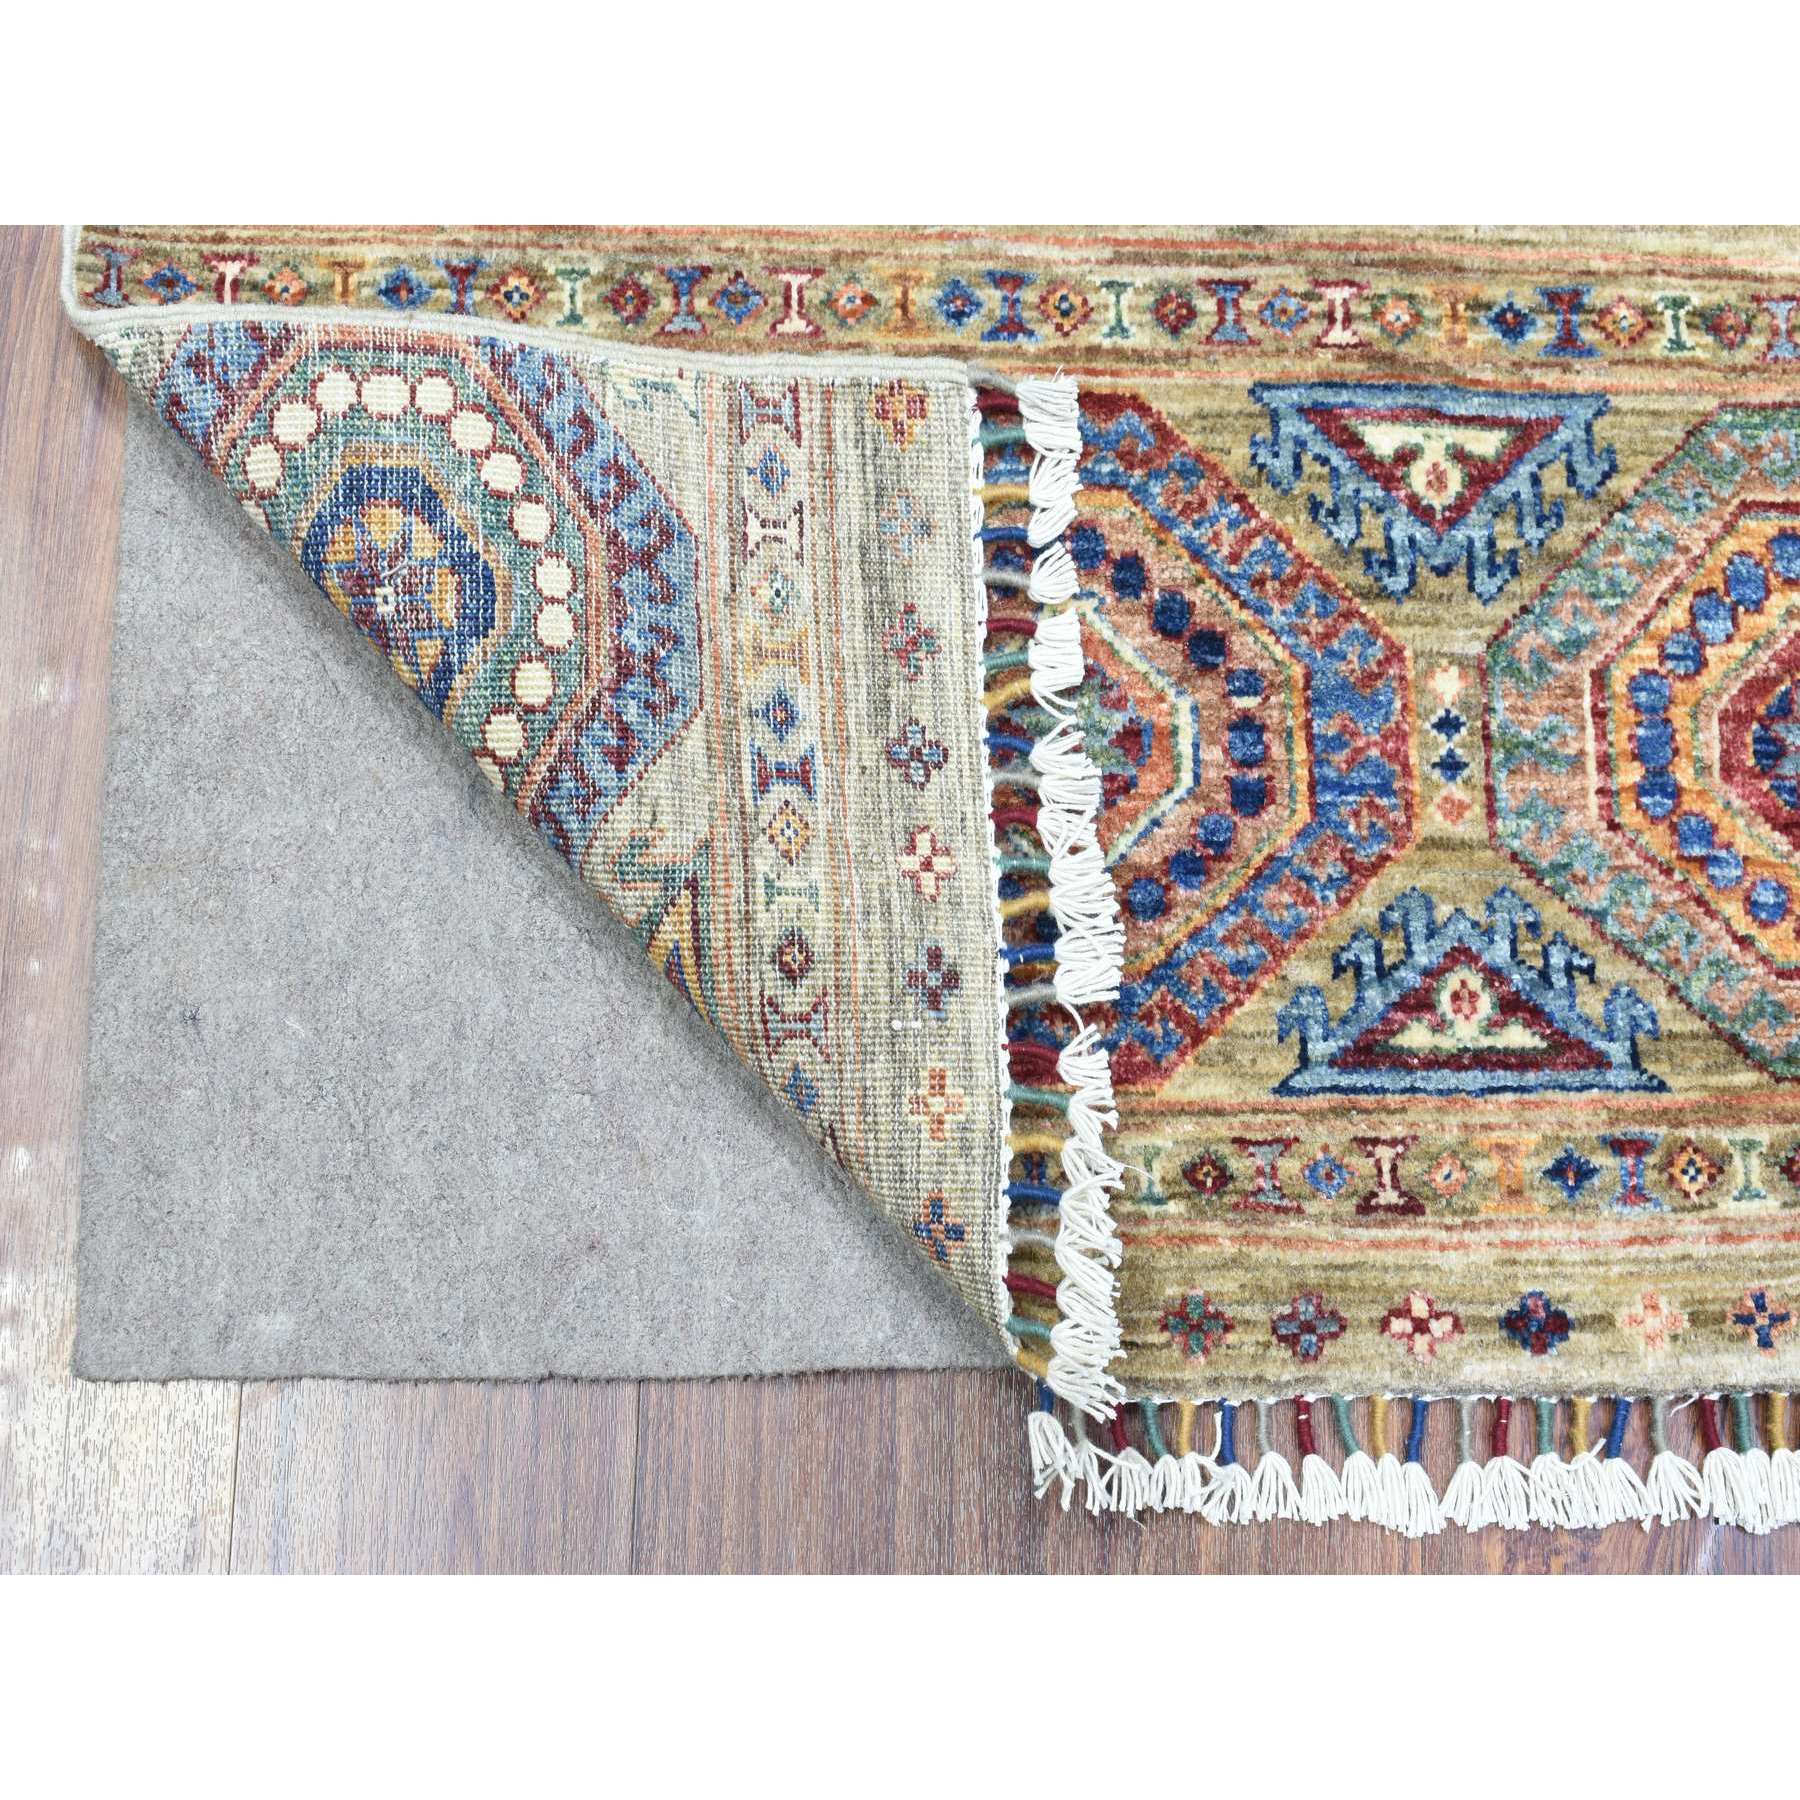 2'8"x4' Taupe, Soft and Velvety Wool Hand Woven, Afghan Super Kazak with Khorjin Design Natural Dyes Densely Weave, Oriental Rug 